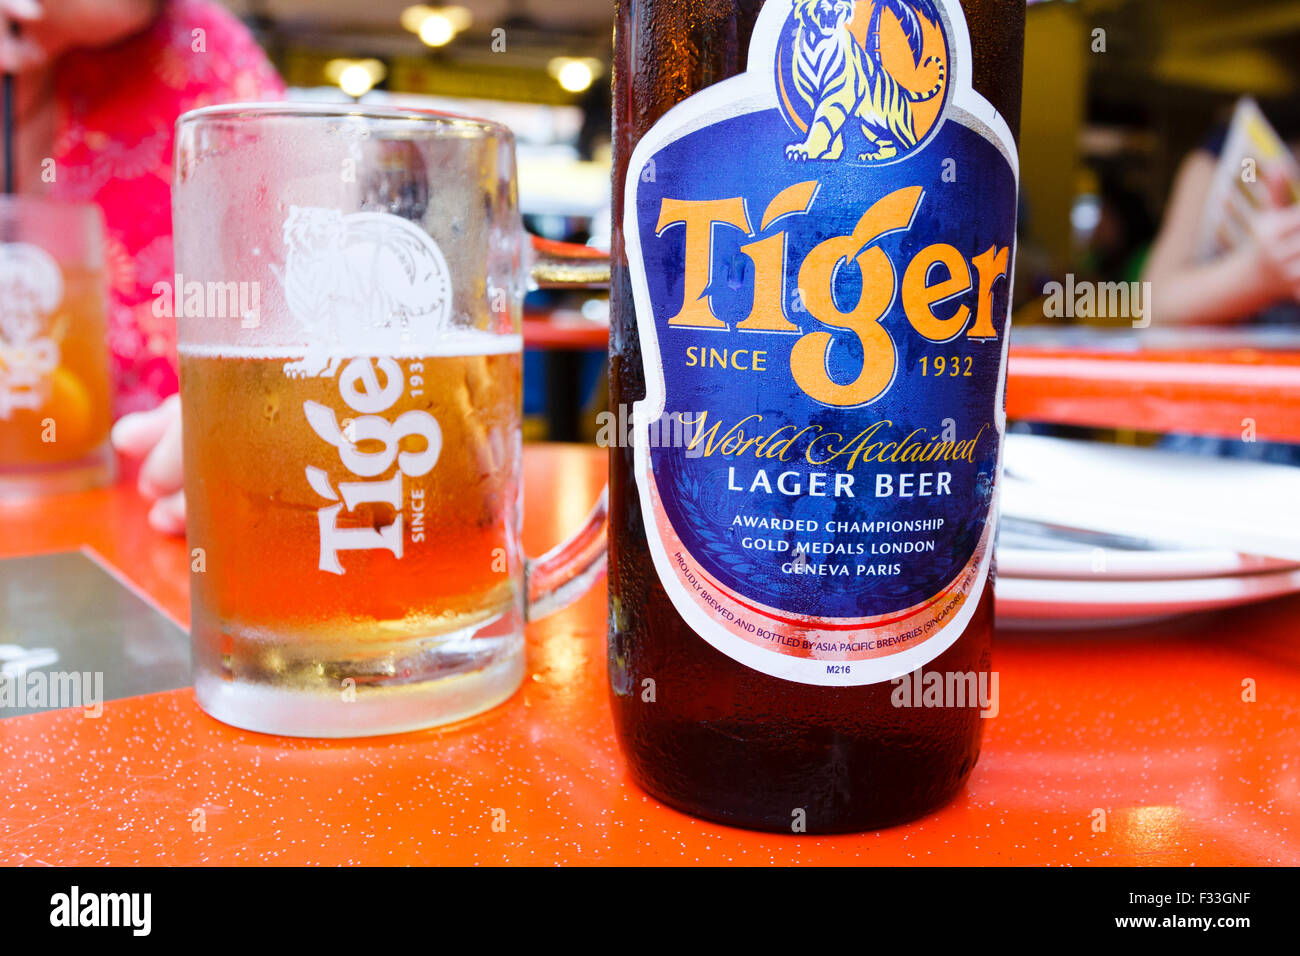 Bottle and glass of Tiger beer, China town, Singapore Stock Photo